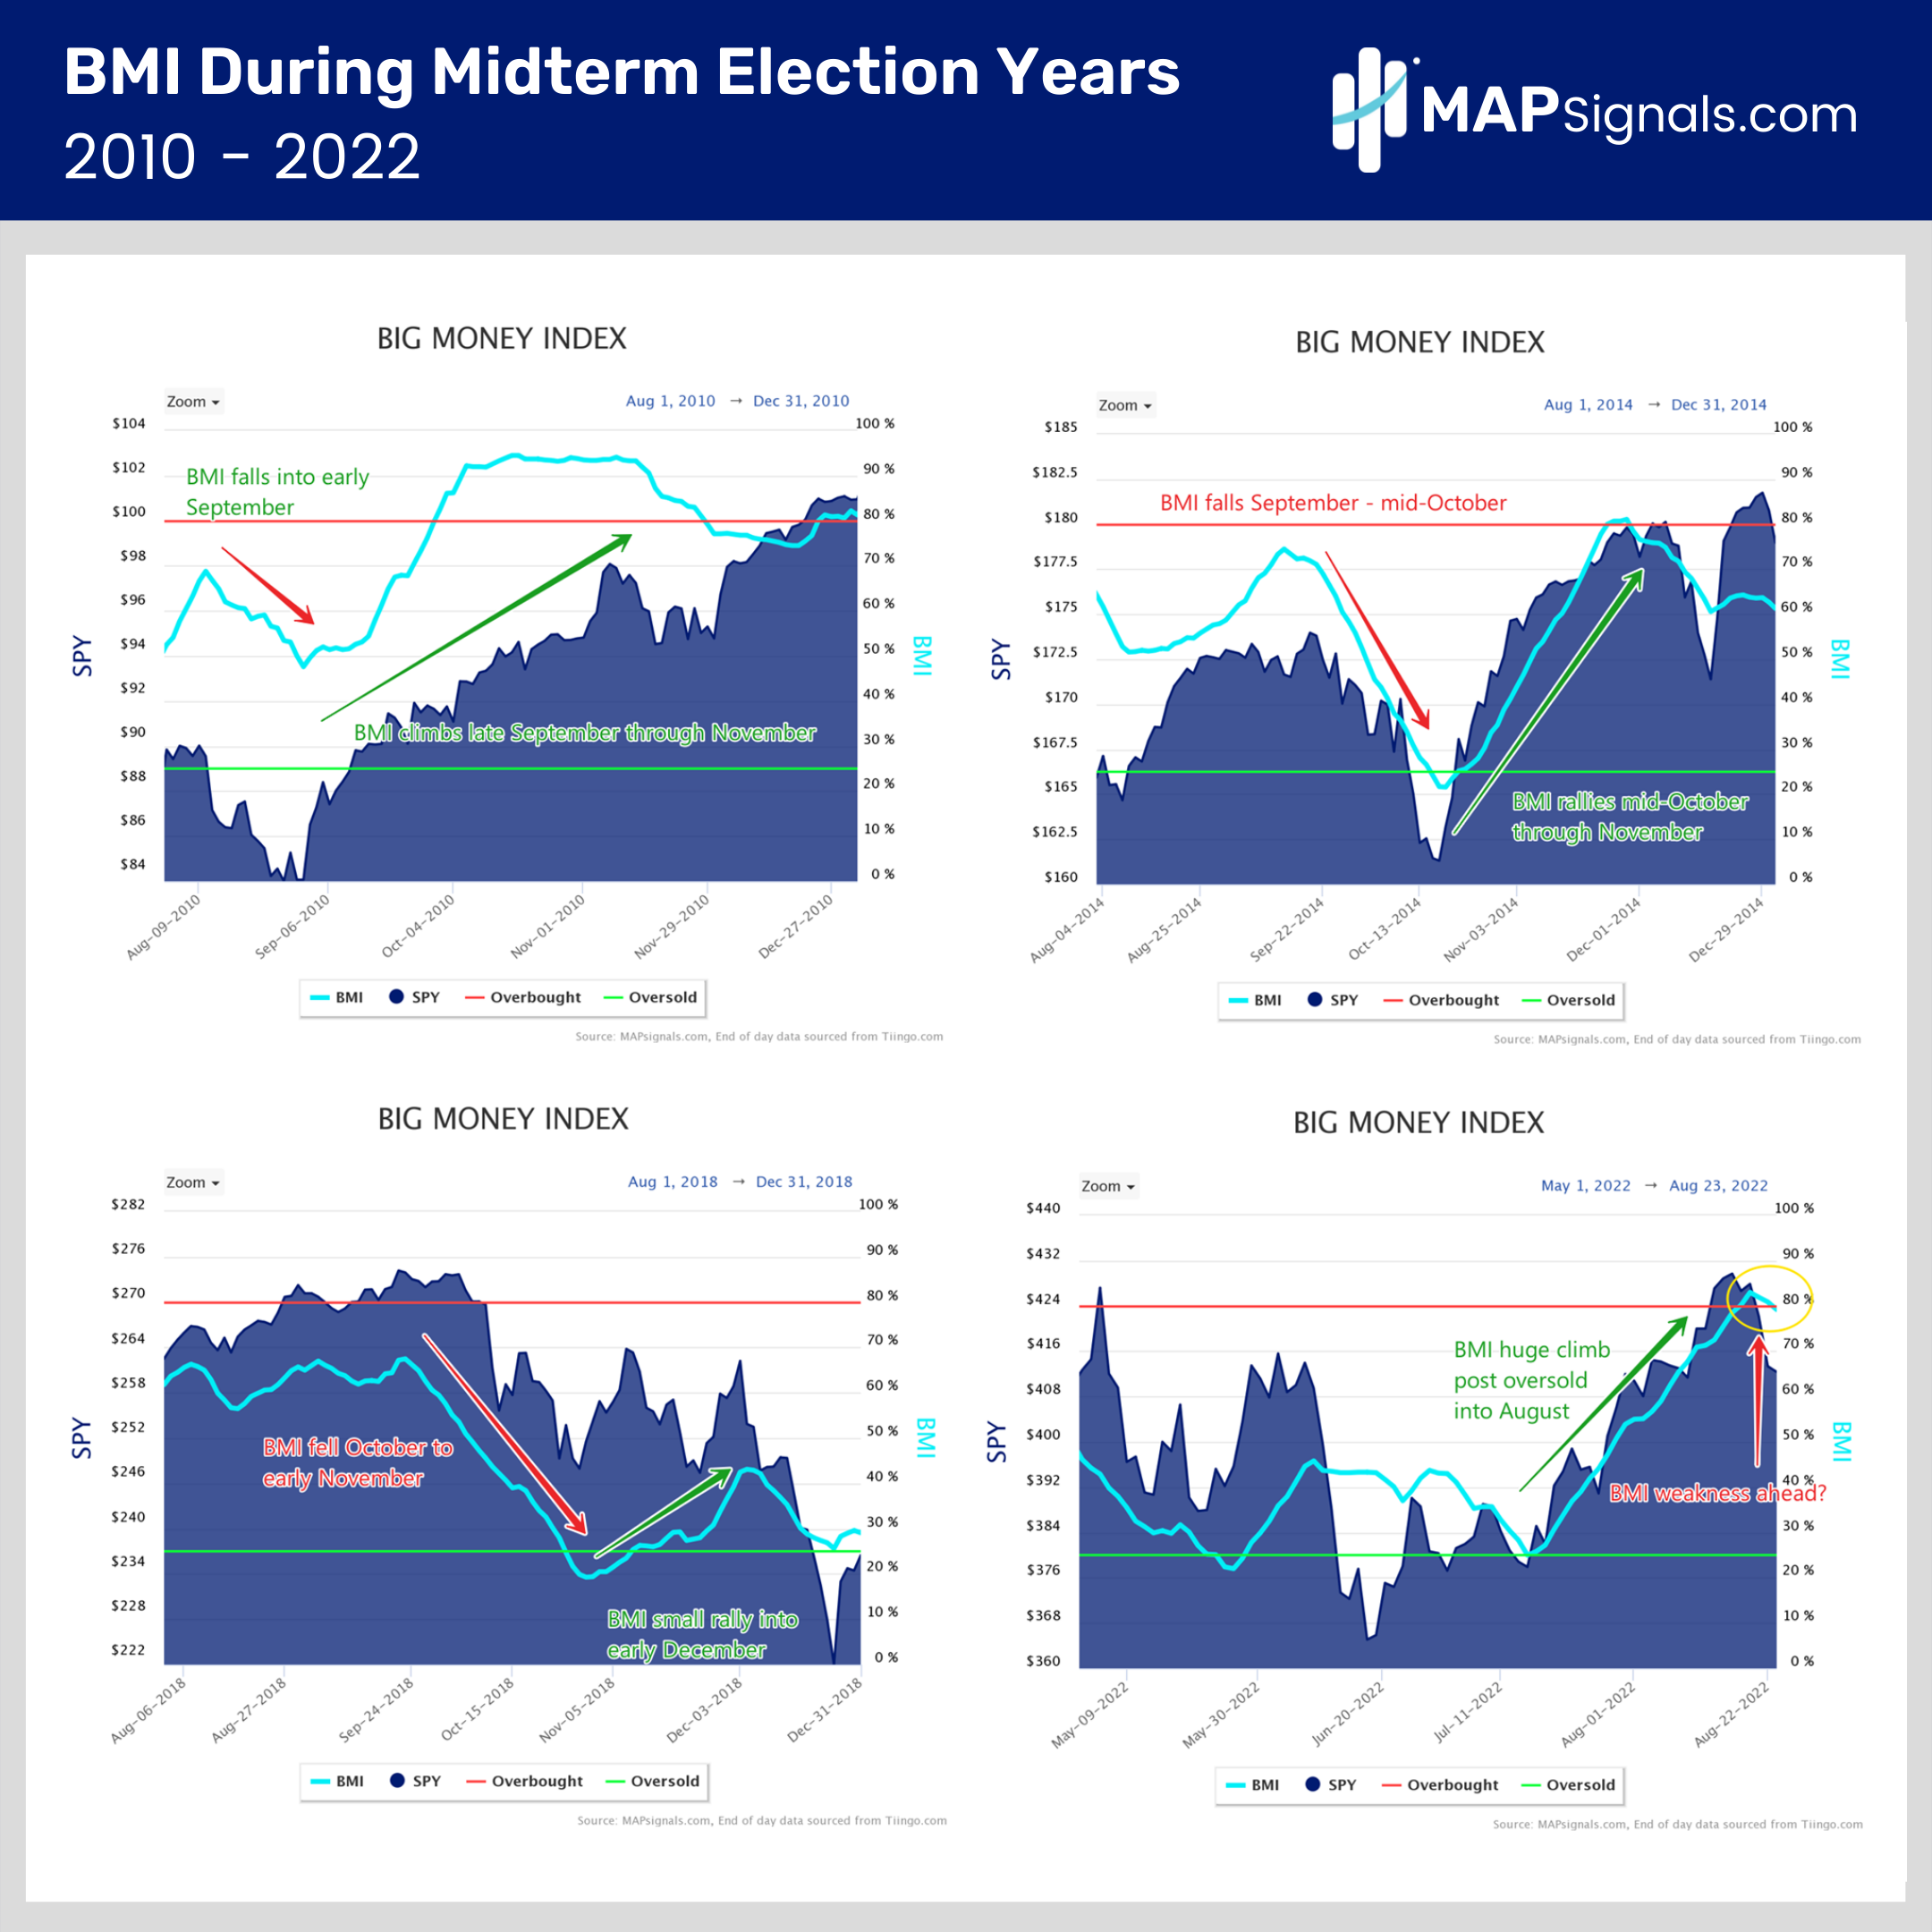 BMI During Midterm Election Years 2010 - 2022 | MAPsignals